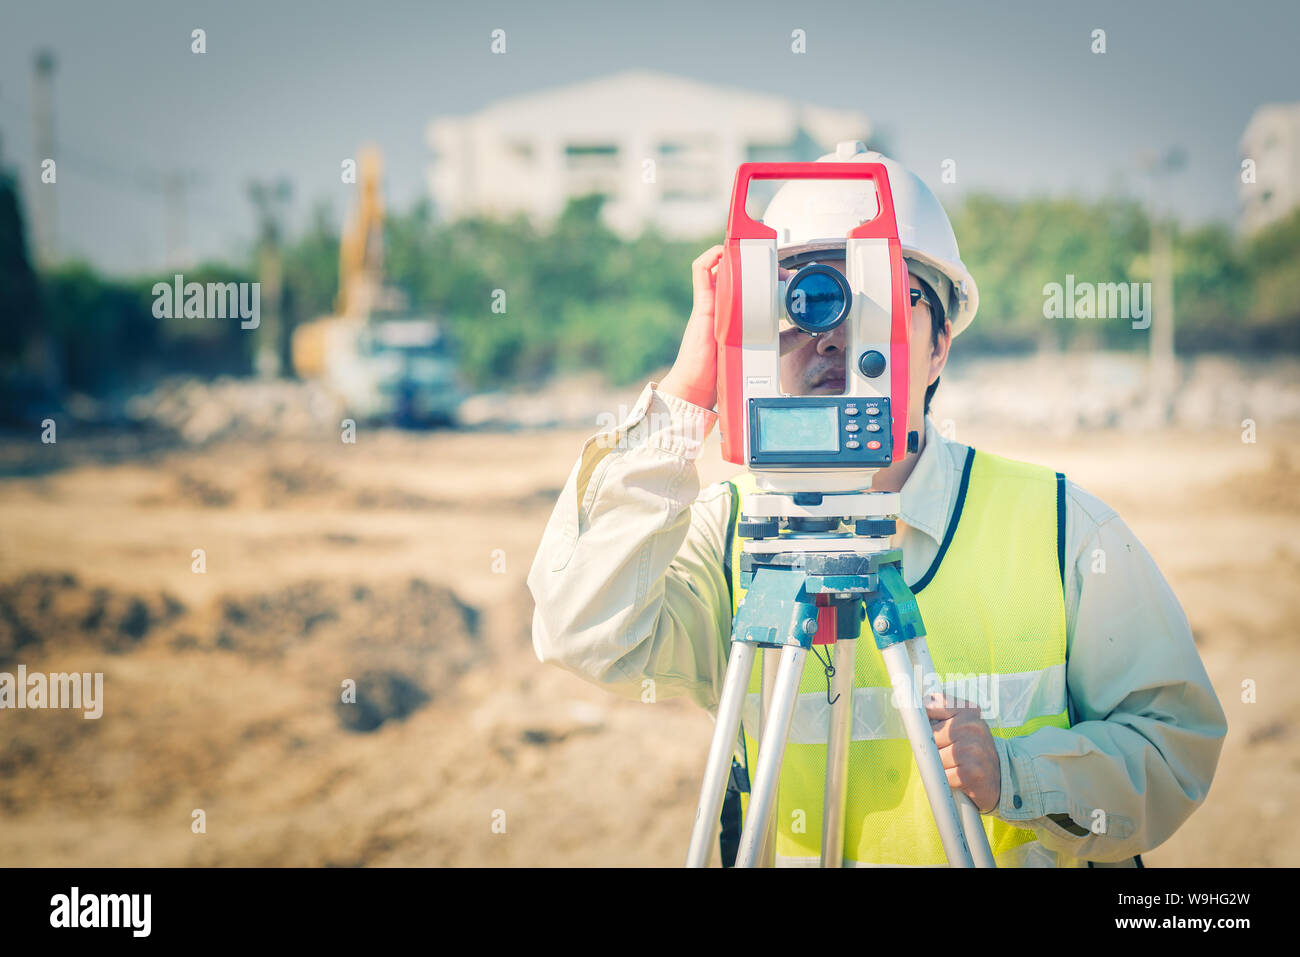 Civil engineer use surveyor equipment theodolite checking construction site for new Infrastructure project. photo concept for engineering work. Stock Photo